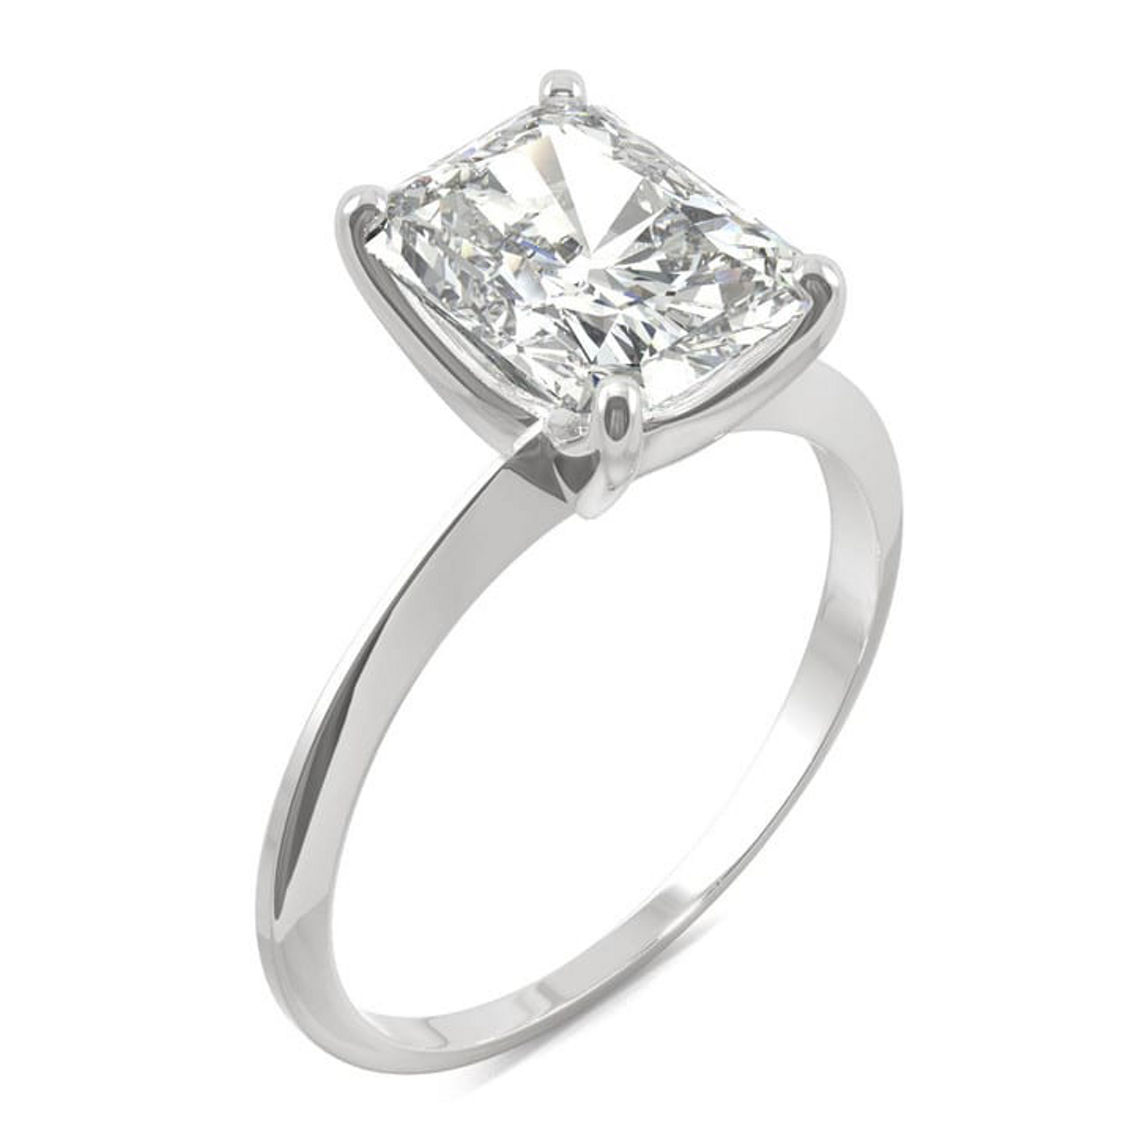 Charles & Colvard 2.70cttw Moissanite Radiant Cut Solitaire Ring in 14k White Gold - Image 2 of 5